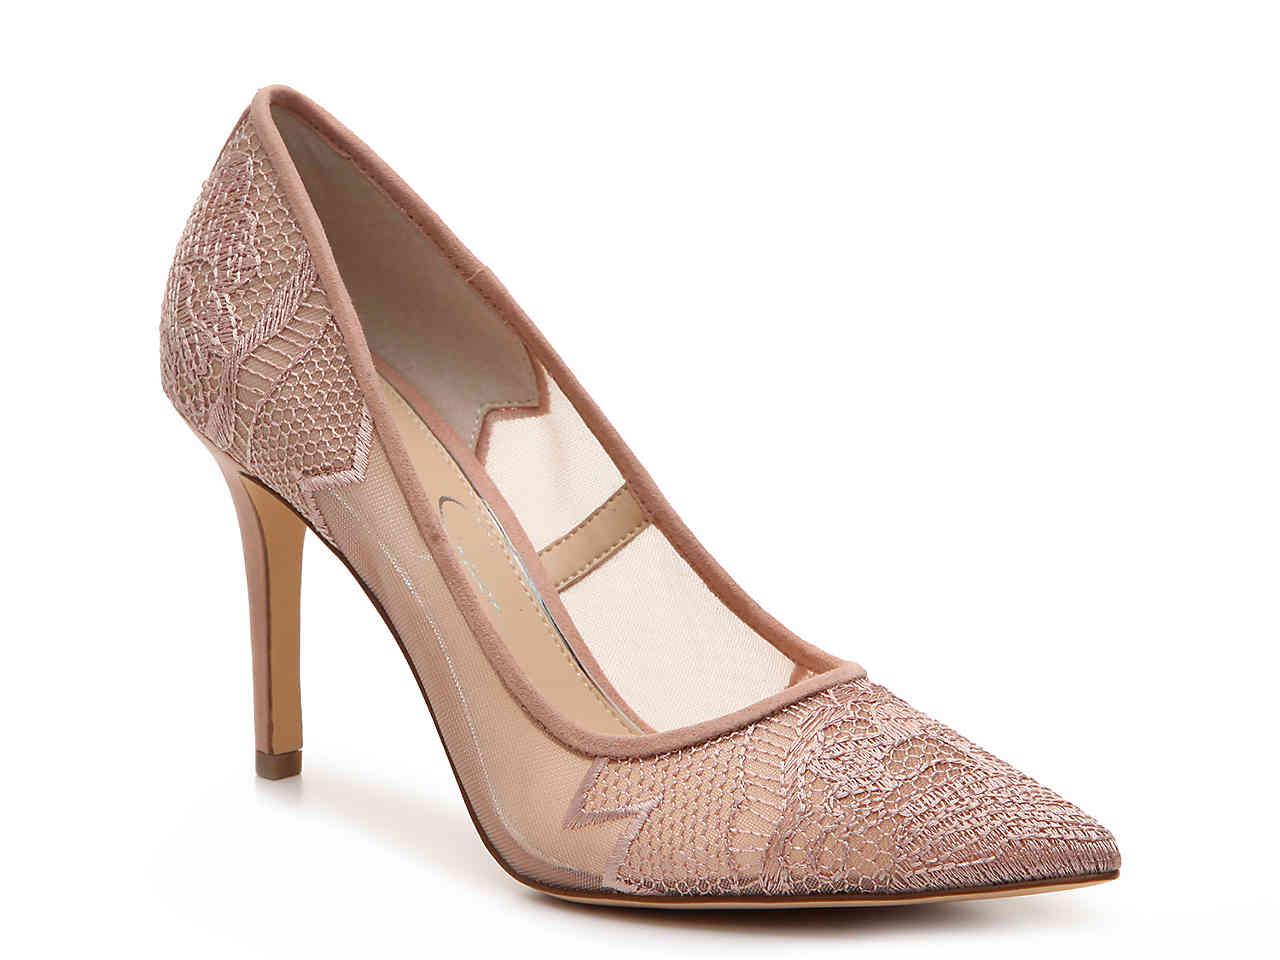 Jessica Simpson Lace Lequira Pump in Light Pink (Pink) - Lyst